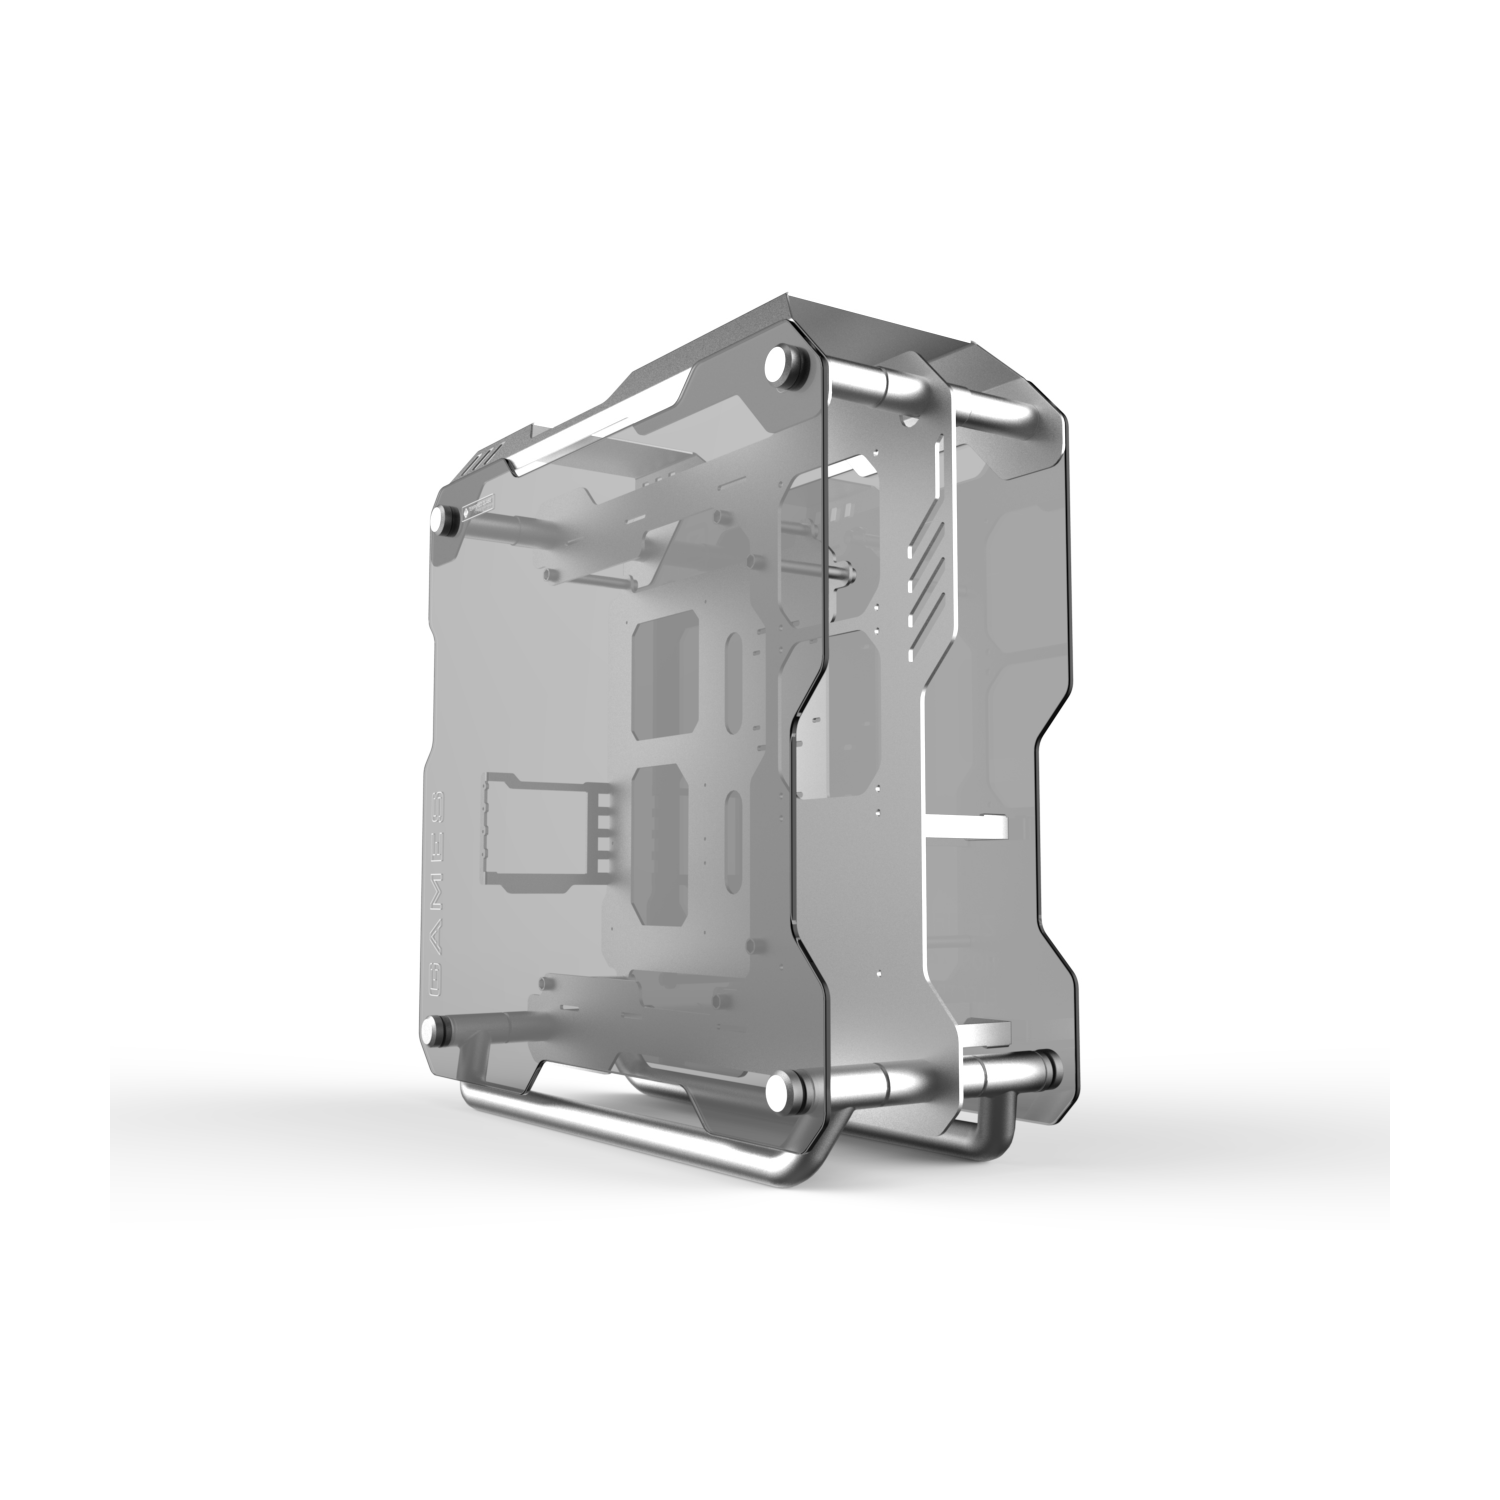 H.E. ZC-01Tempered Glass Computer Case Support 360mm Radiator Support ATX Motherboard -Silver